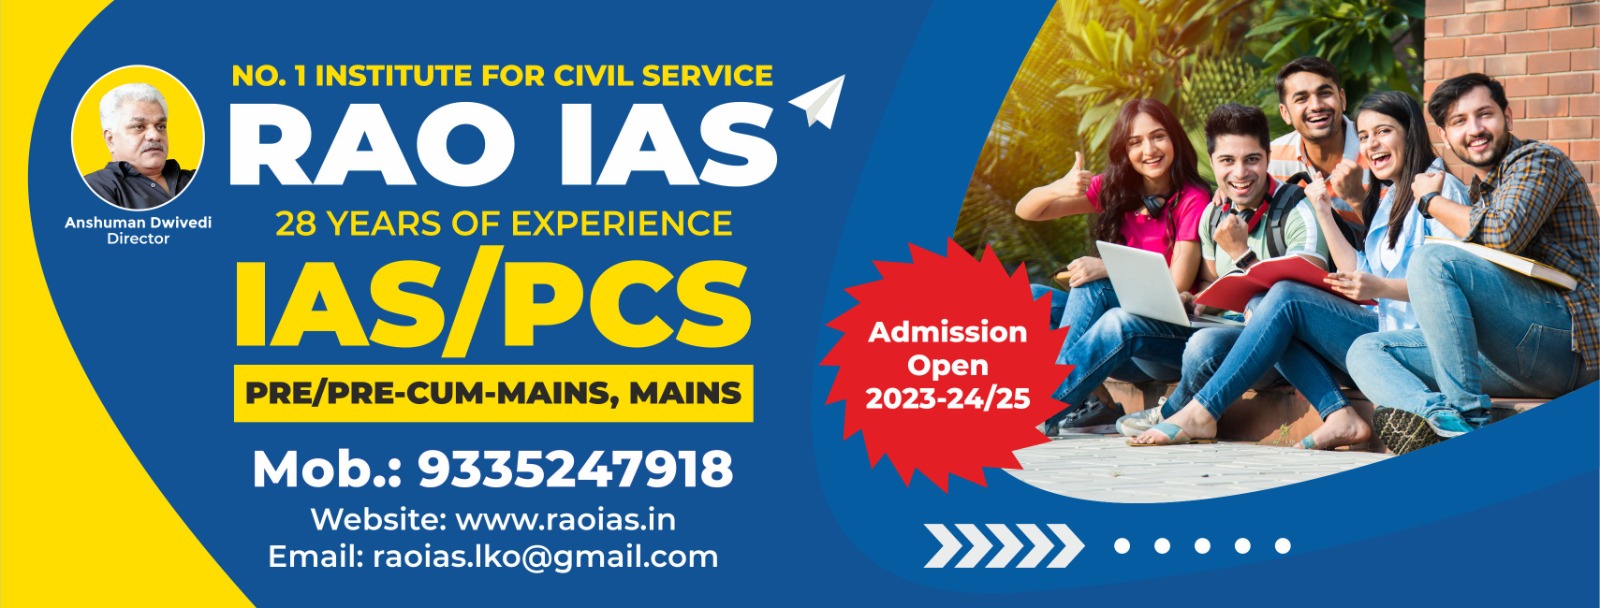 ADMISSION OPEN 2023-24/25